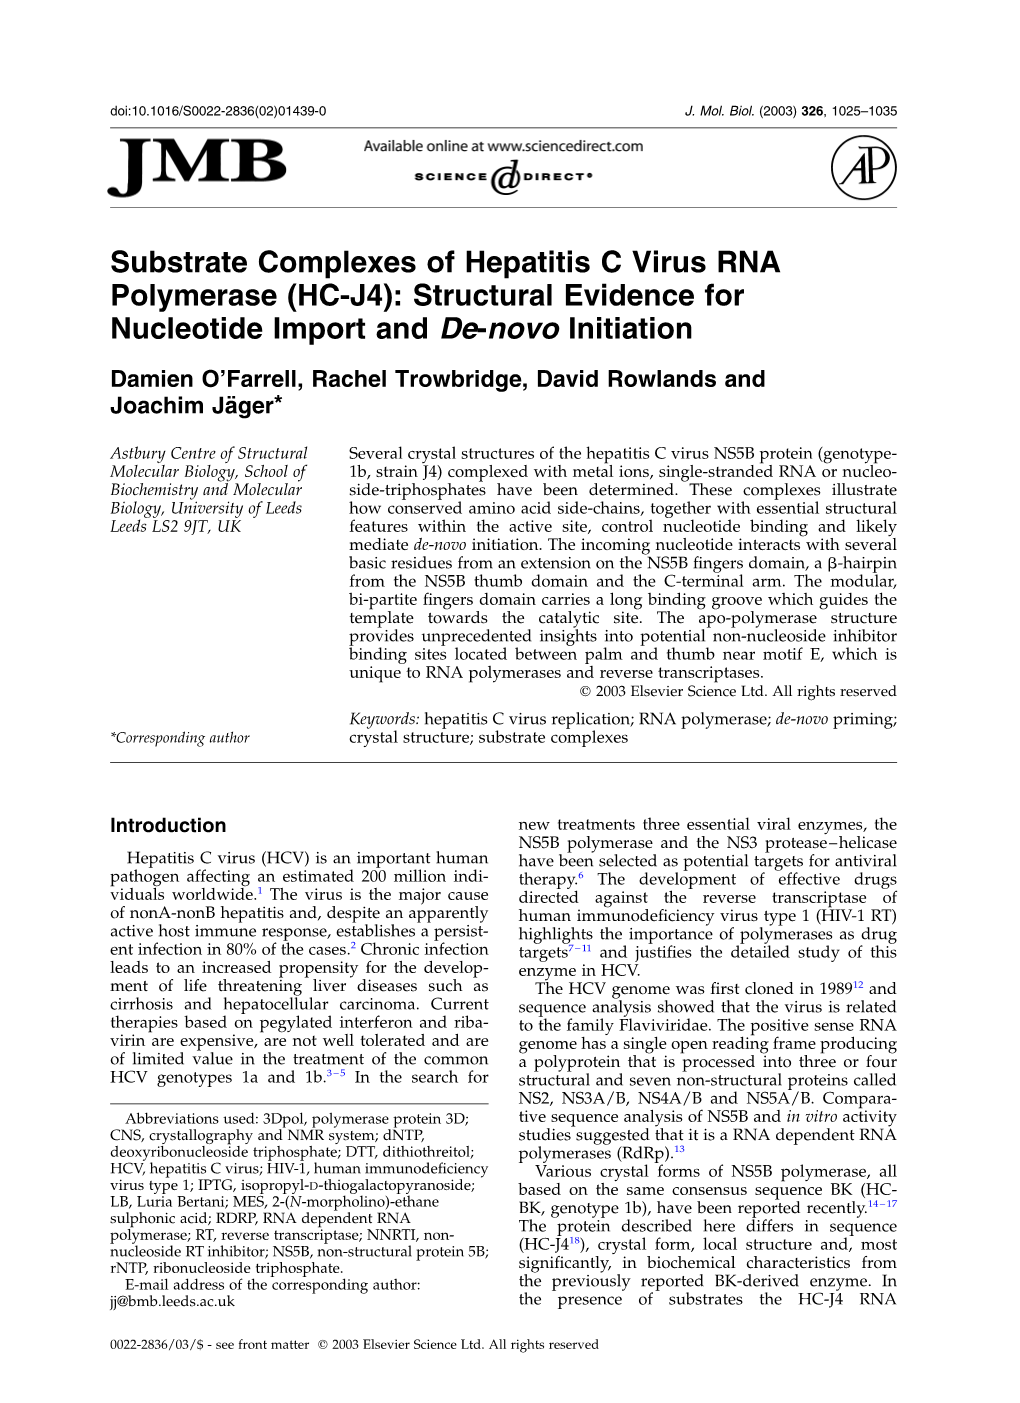 Substrate Complexes of Hepatitis C Virus RNA Polymerase (HC-J4): Structural Evidence for Nucleotide Import and De-Novo Initiation